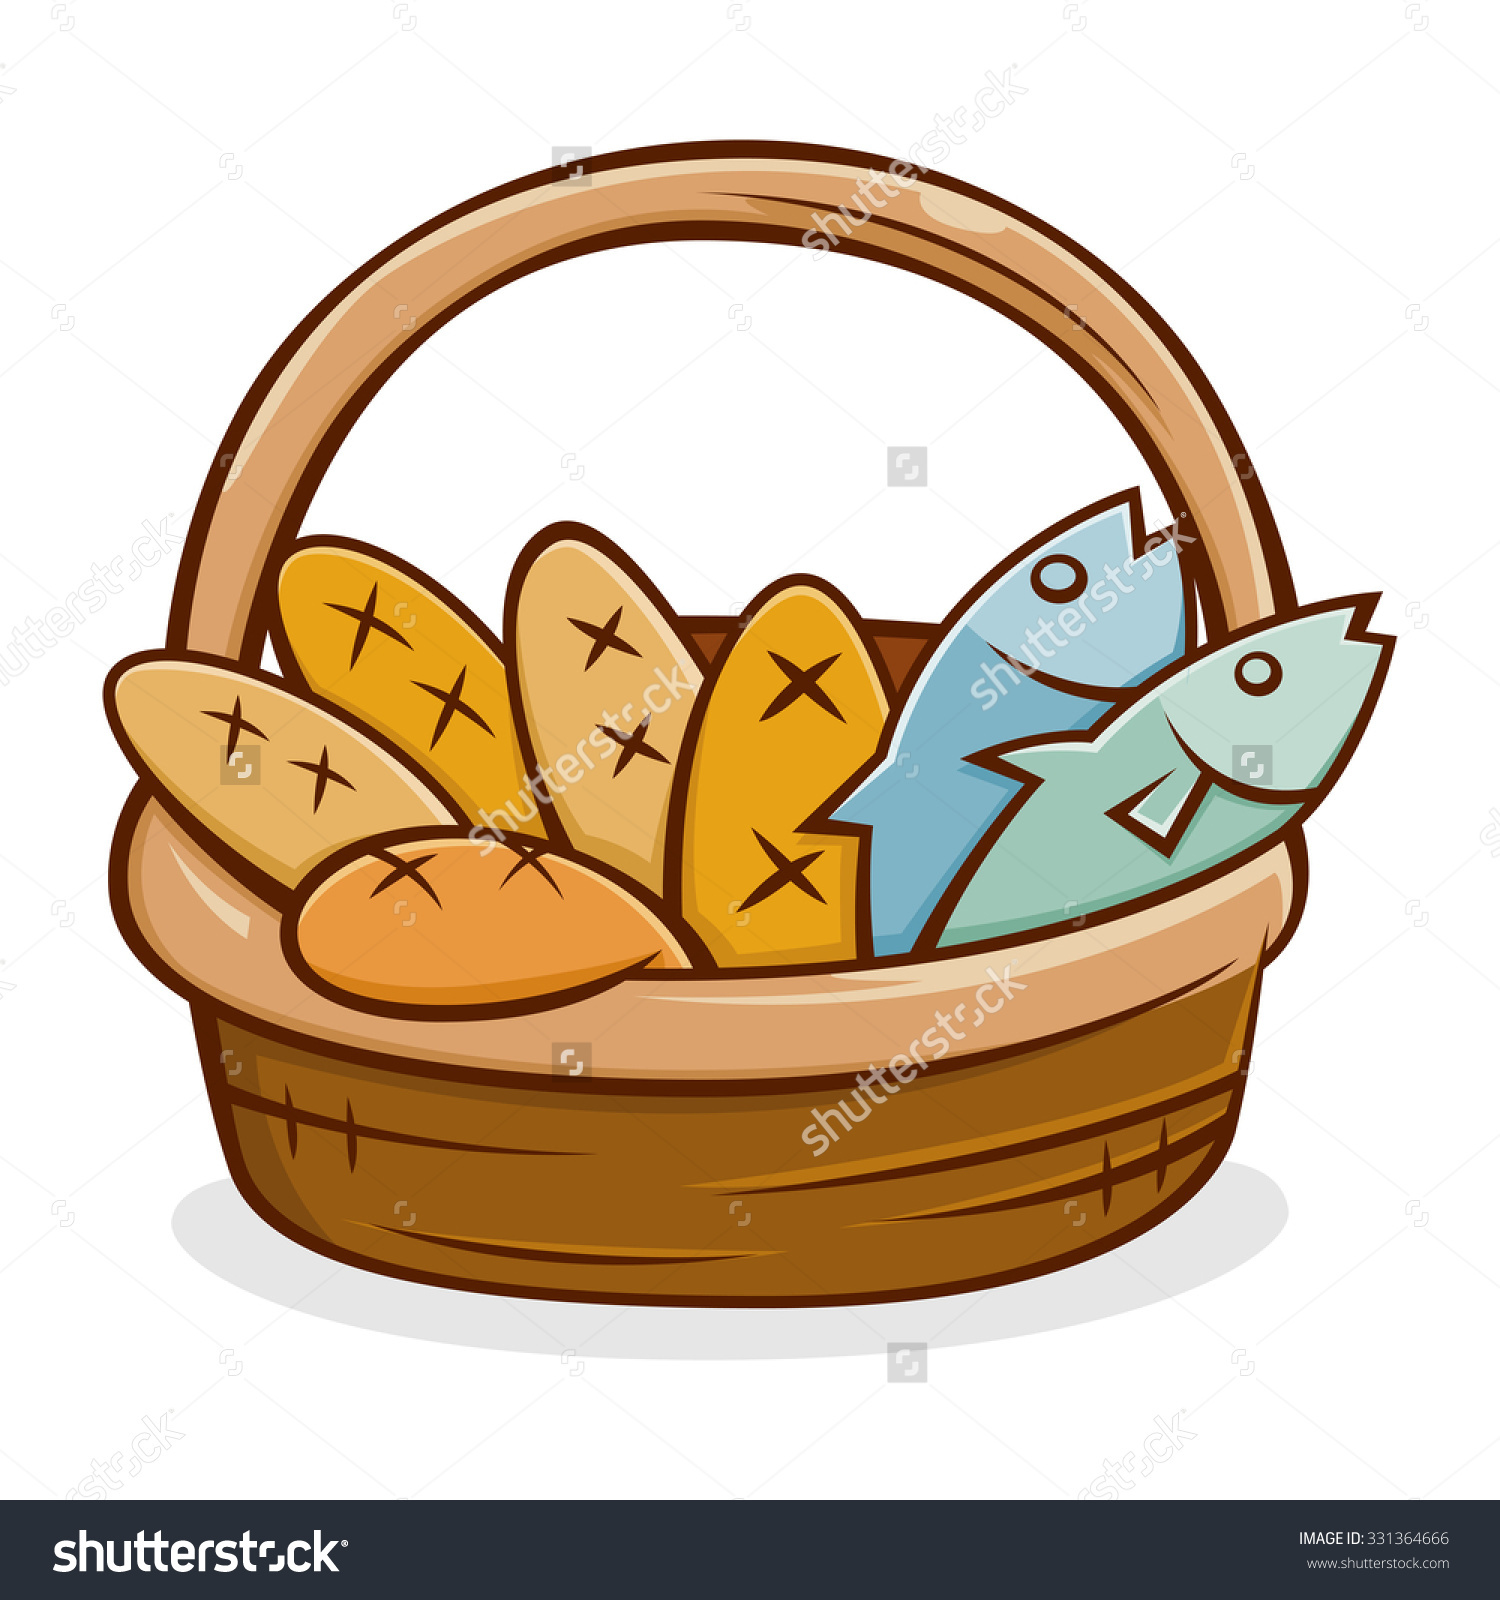 5 Loaves And 2 Fish Clipart.